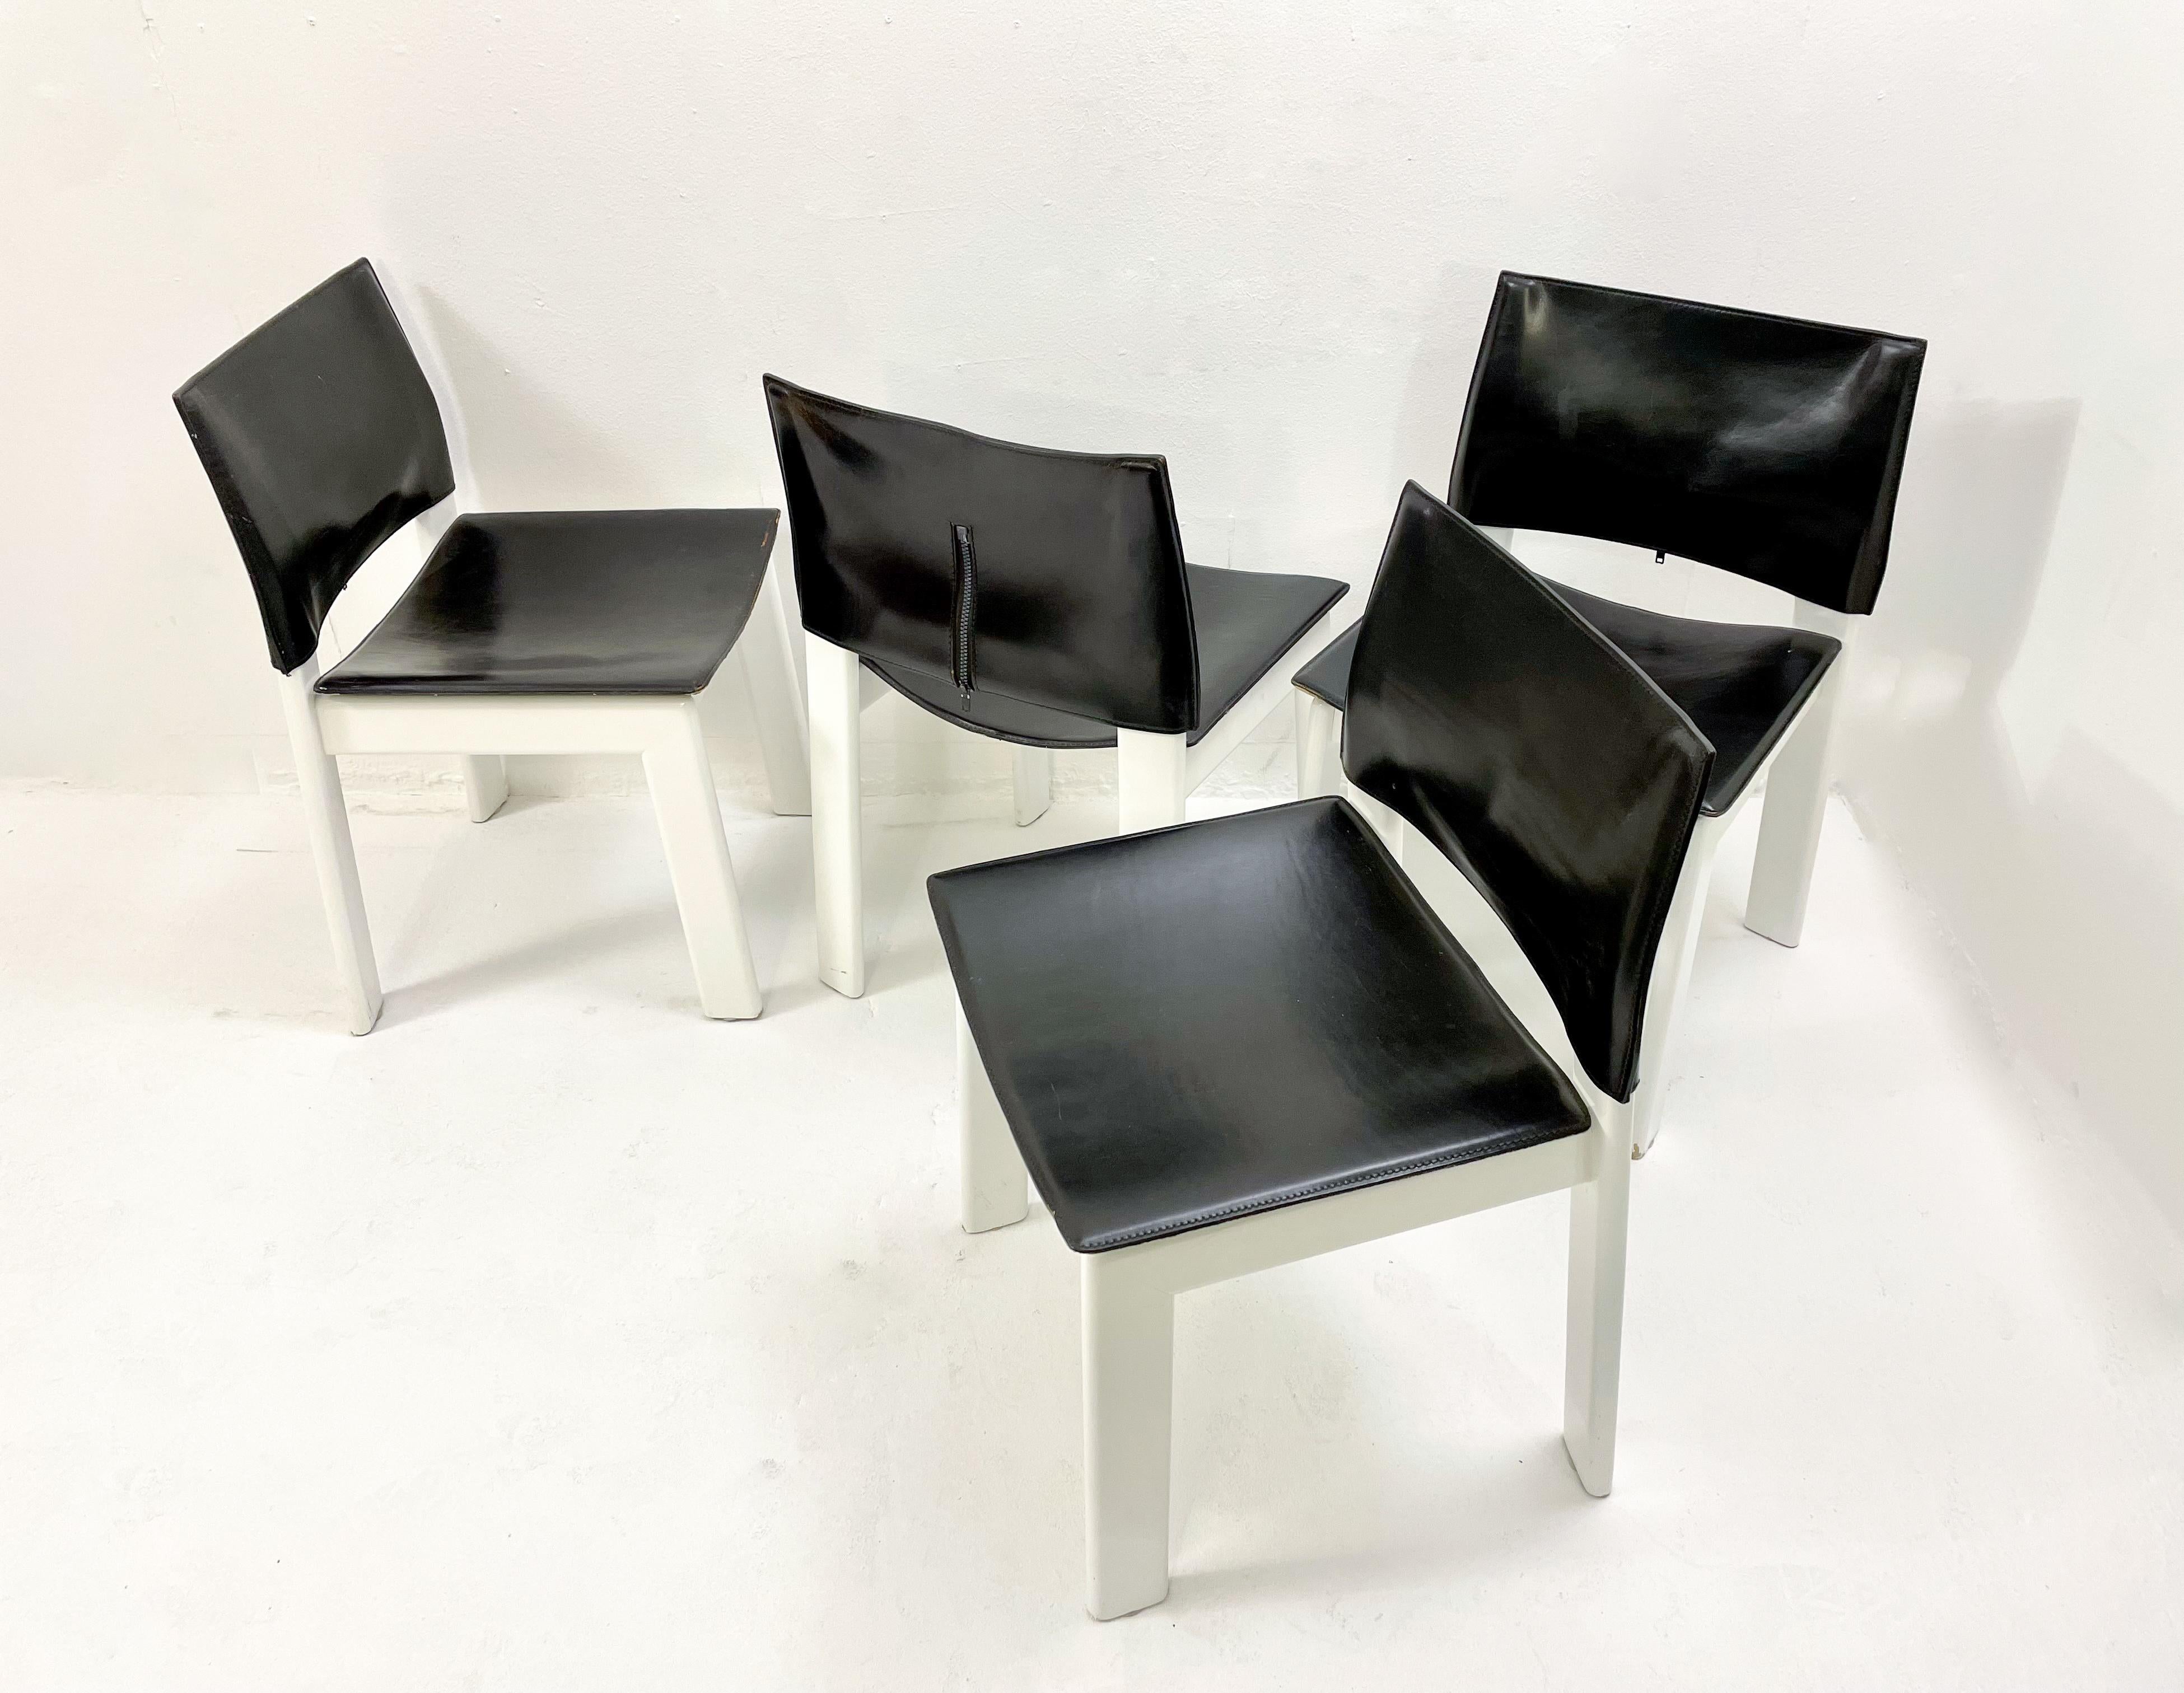 Late 20th Century Mid-Century Modern Set of 4 Chairs, White Wood and Black Leather, Italy, 1970s For Sale